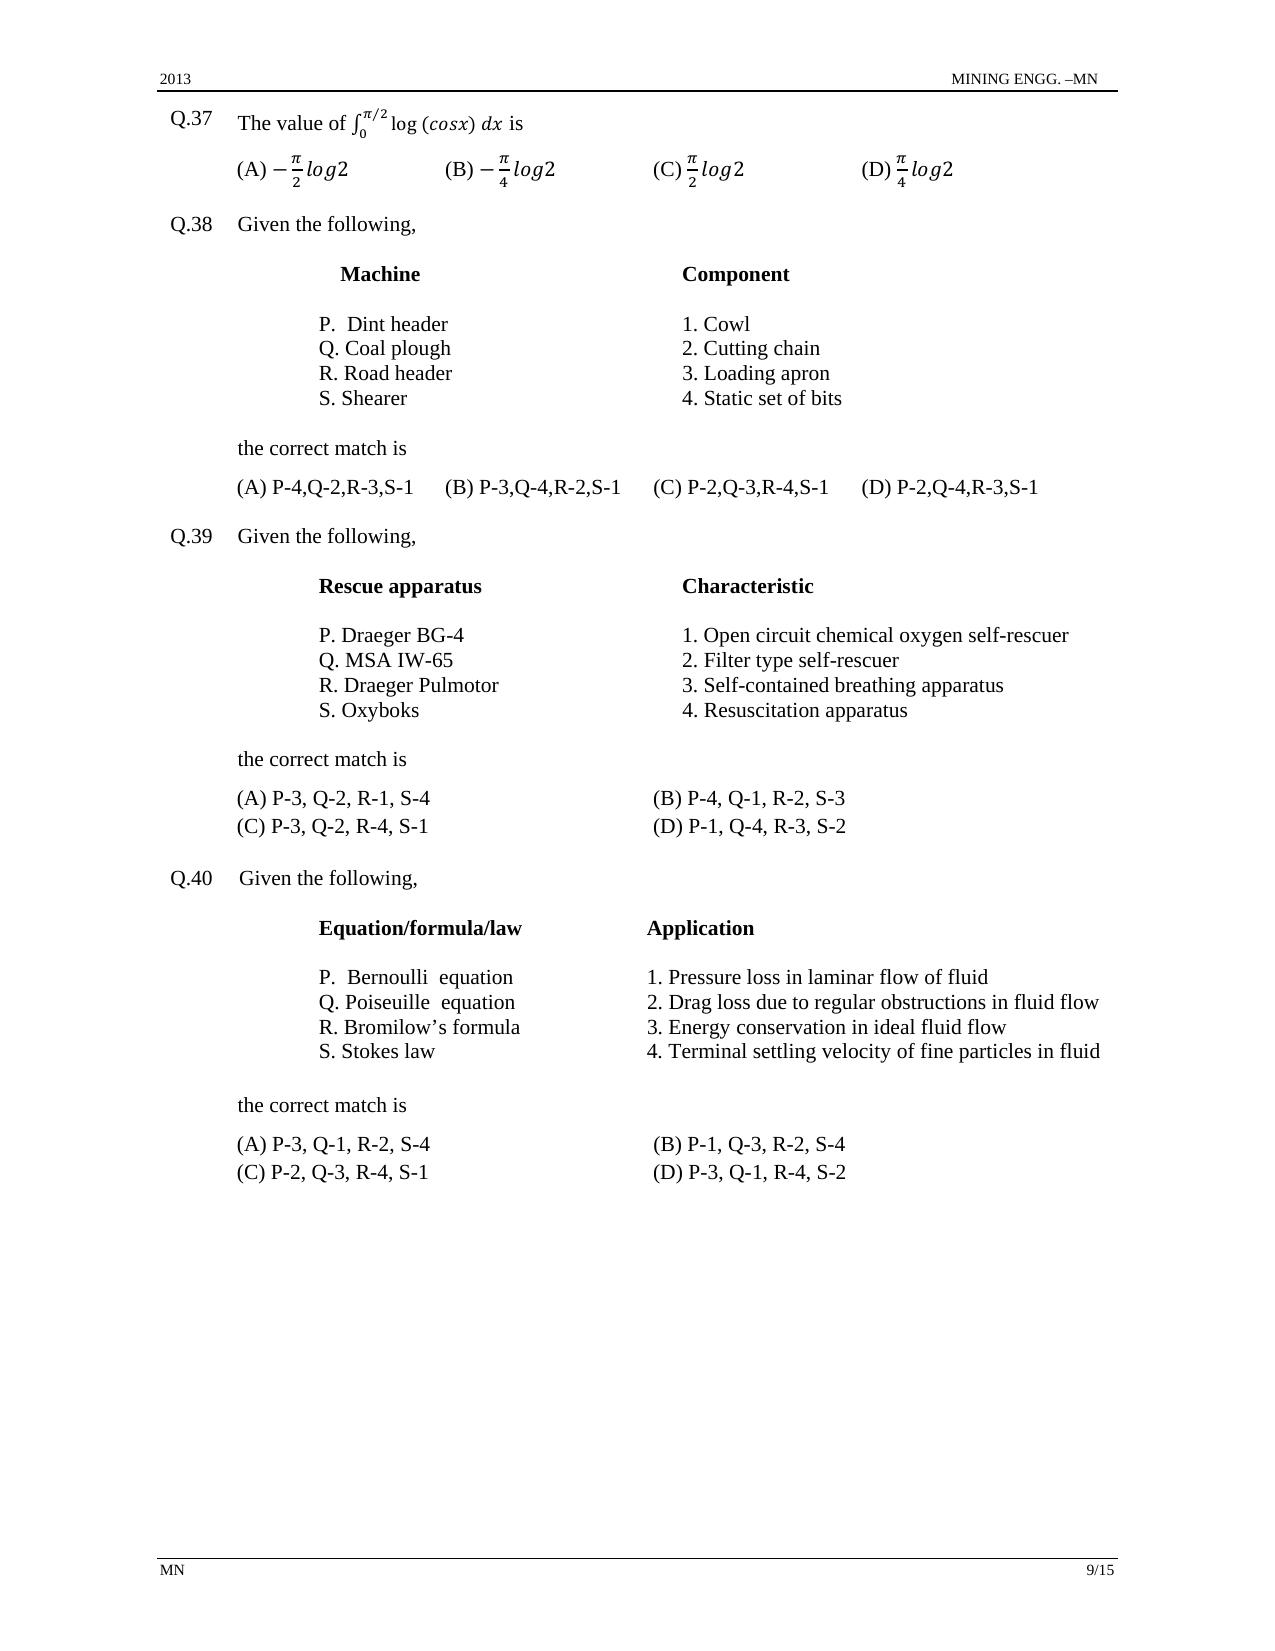 GATE 2013 Mining Engineering (MN) Question Paper with Answer Key - Page 9